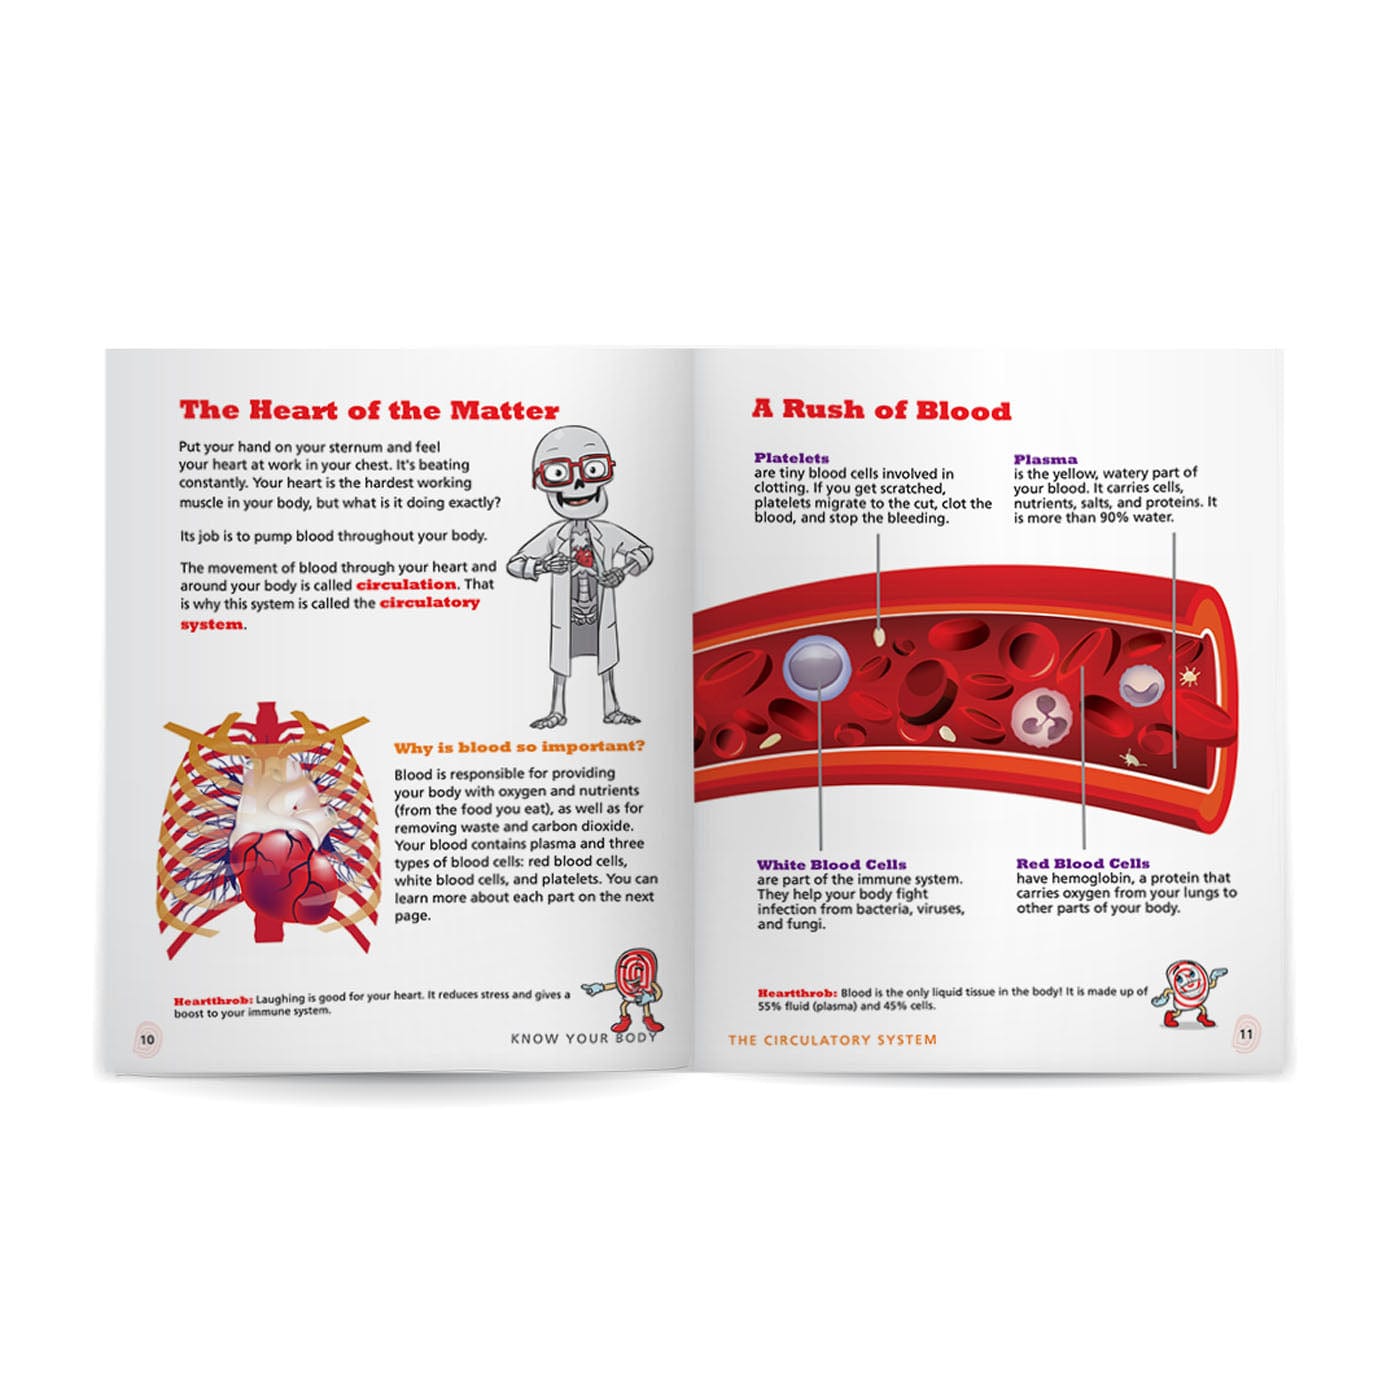 Circulatory System: Know Your Body Health Education for Children